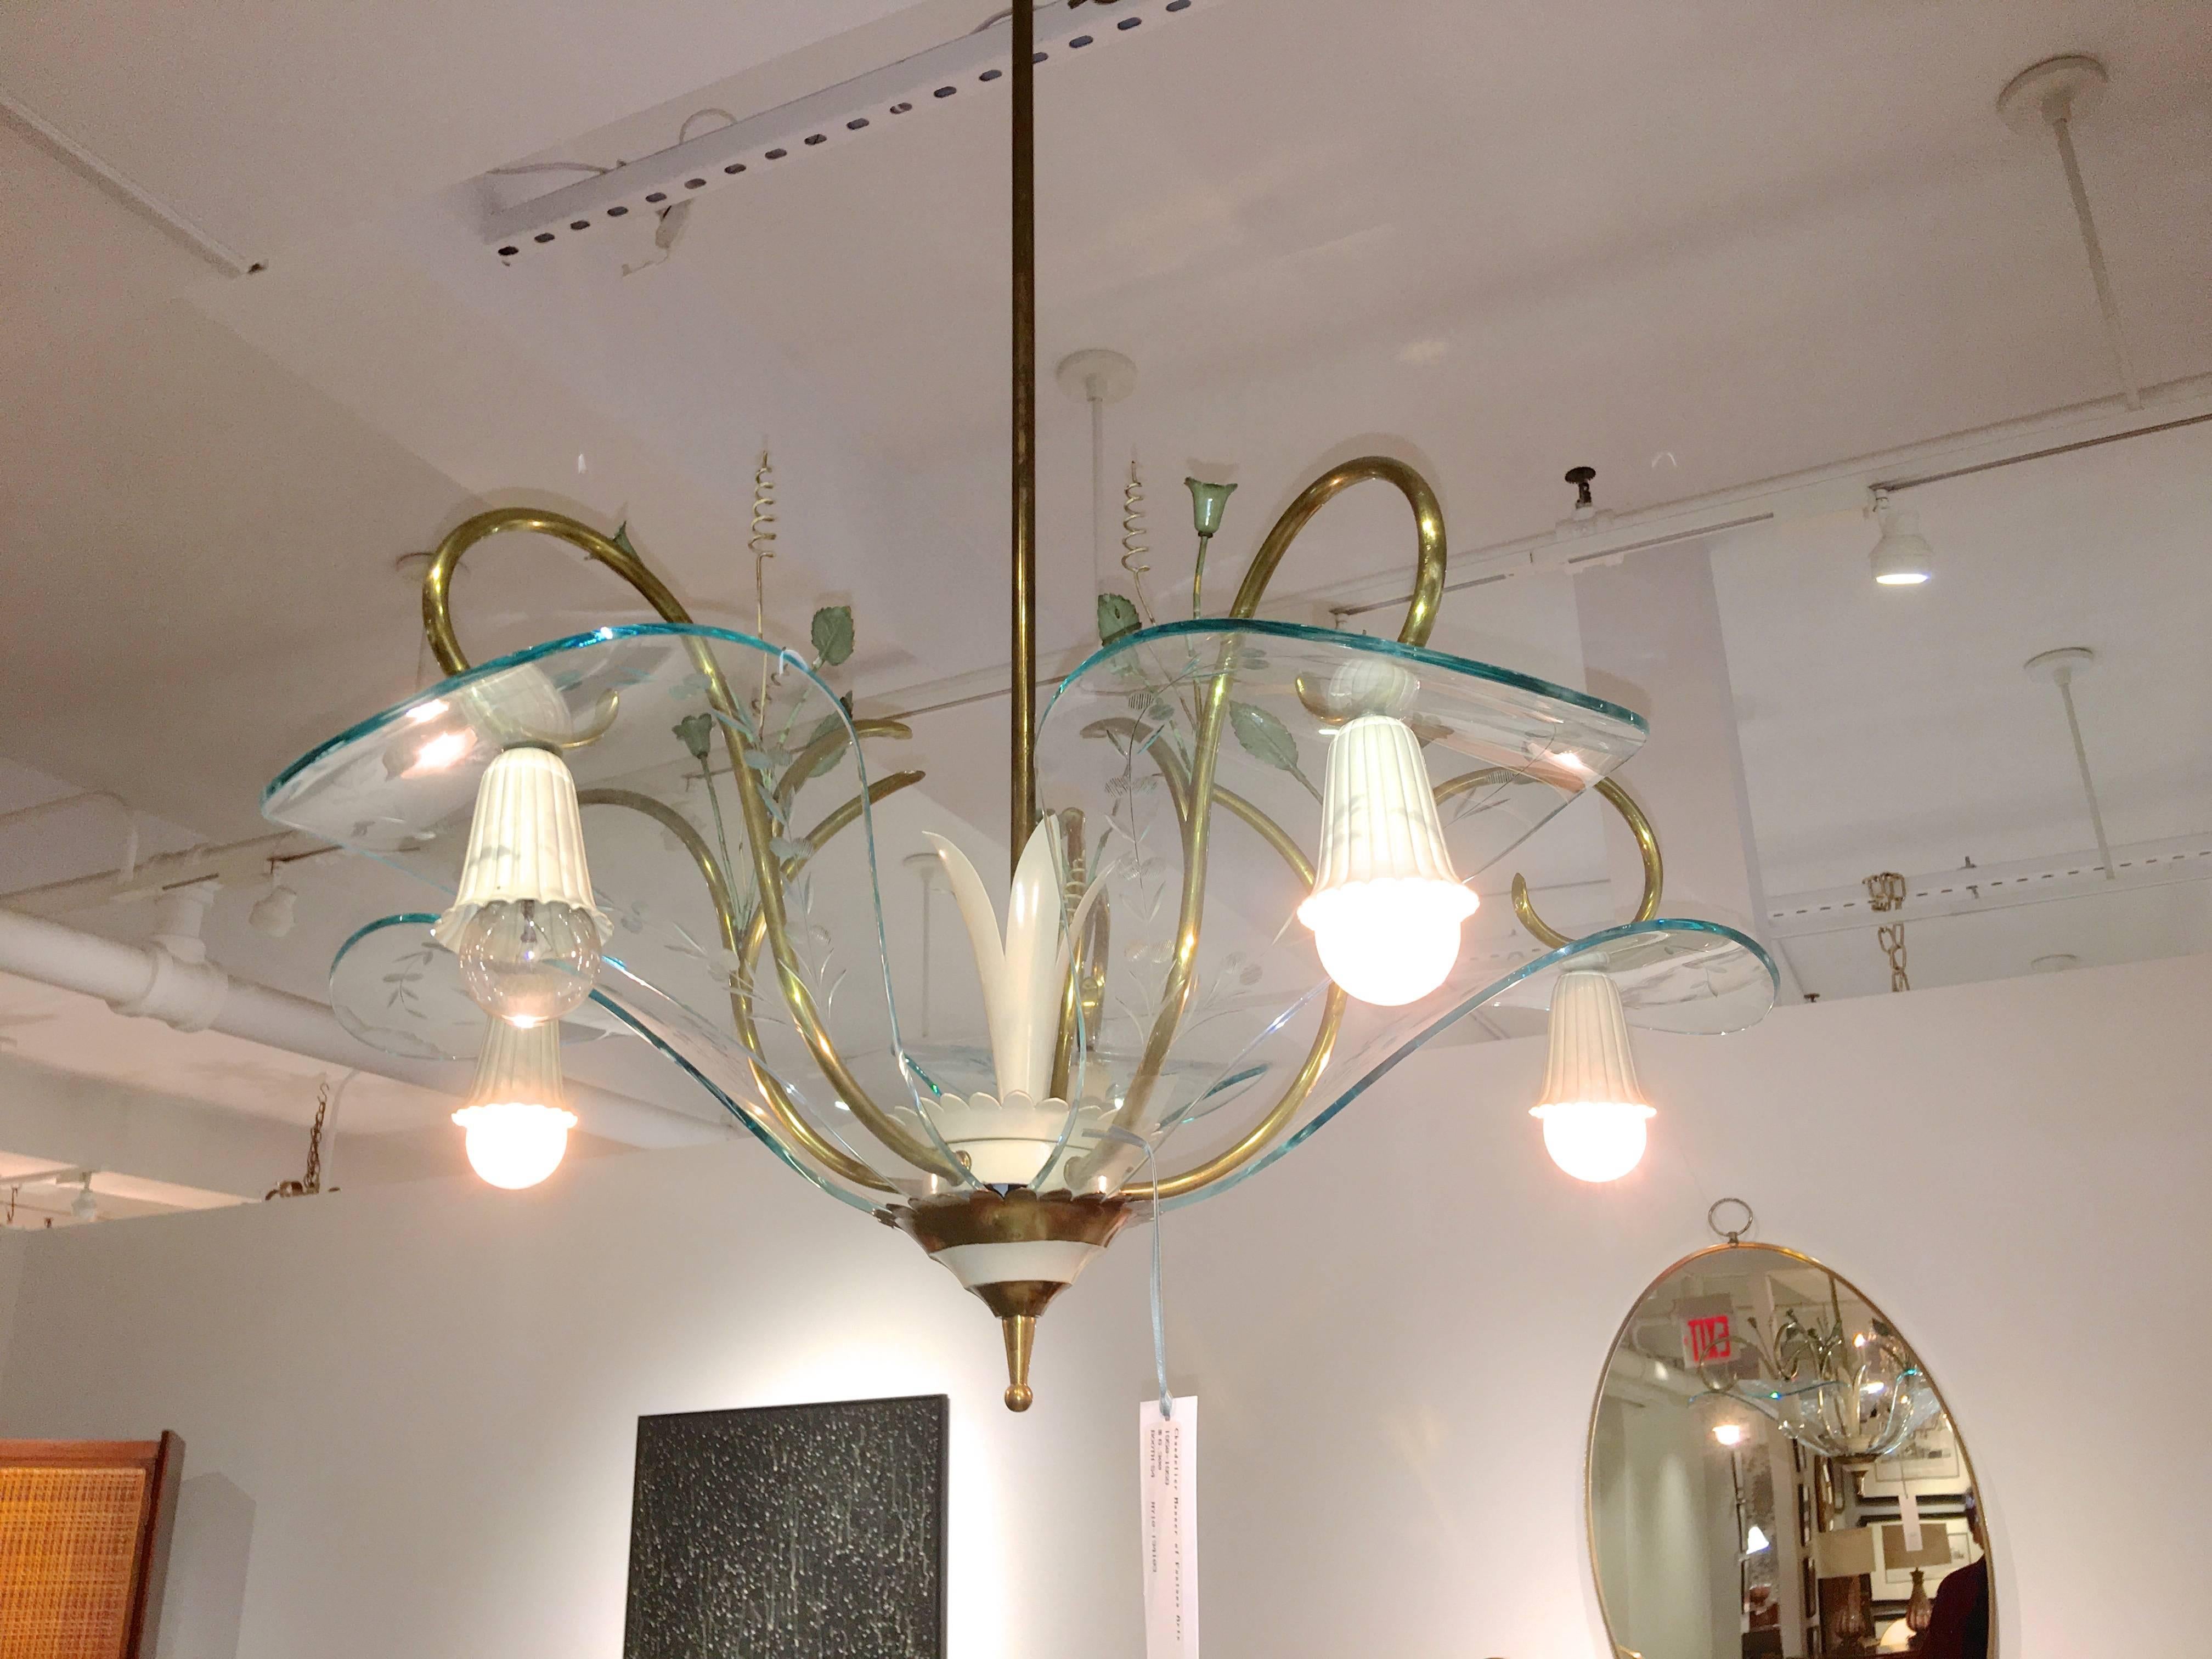 Mid-20th Century 1950's Italian Chandelier Manner of Fontana Arte Etched Curved Glass Petals For Sale